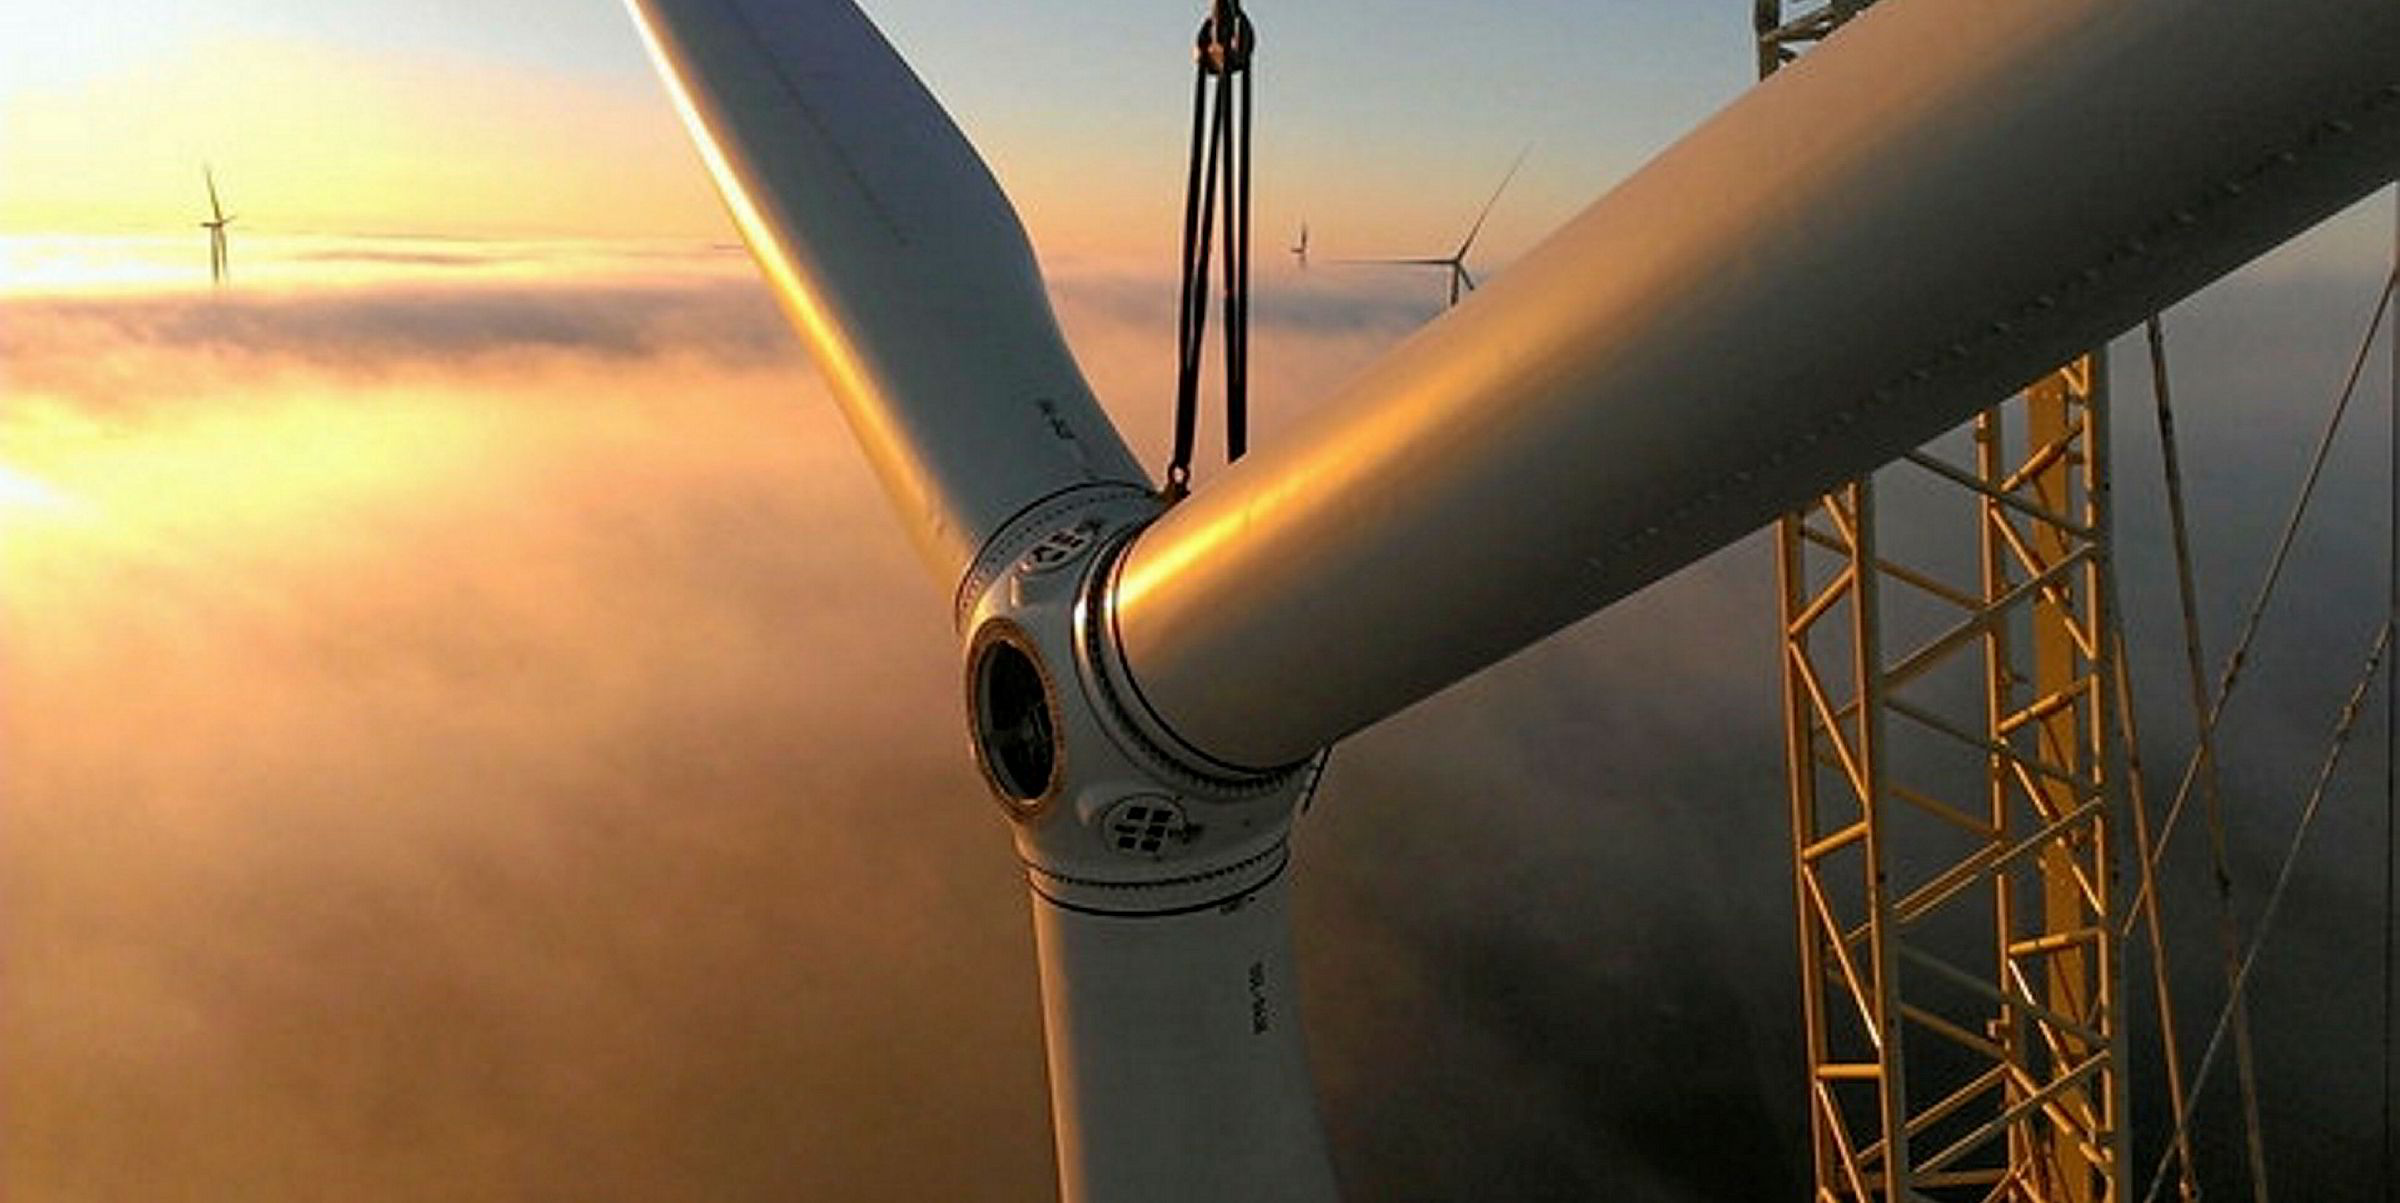 Enel starts building South America's largest wind farm